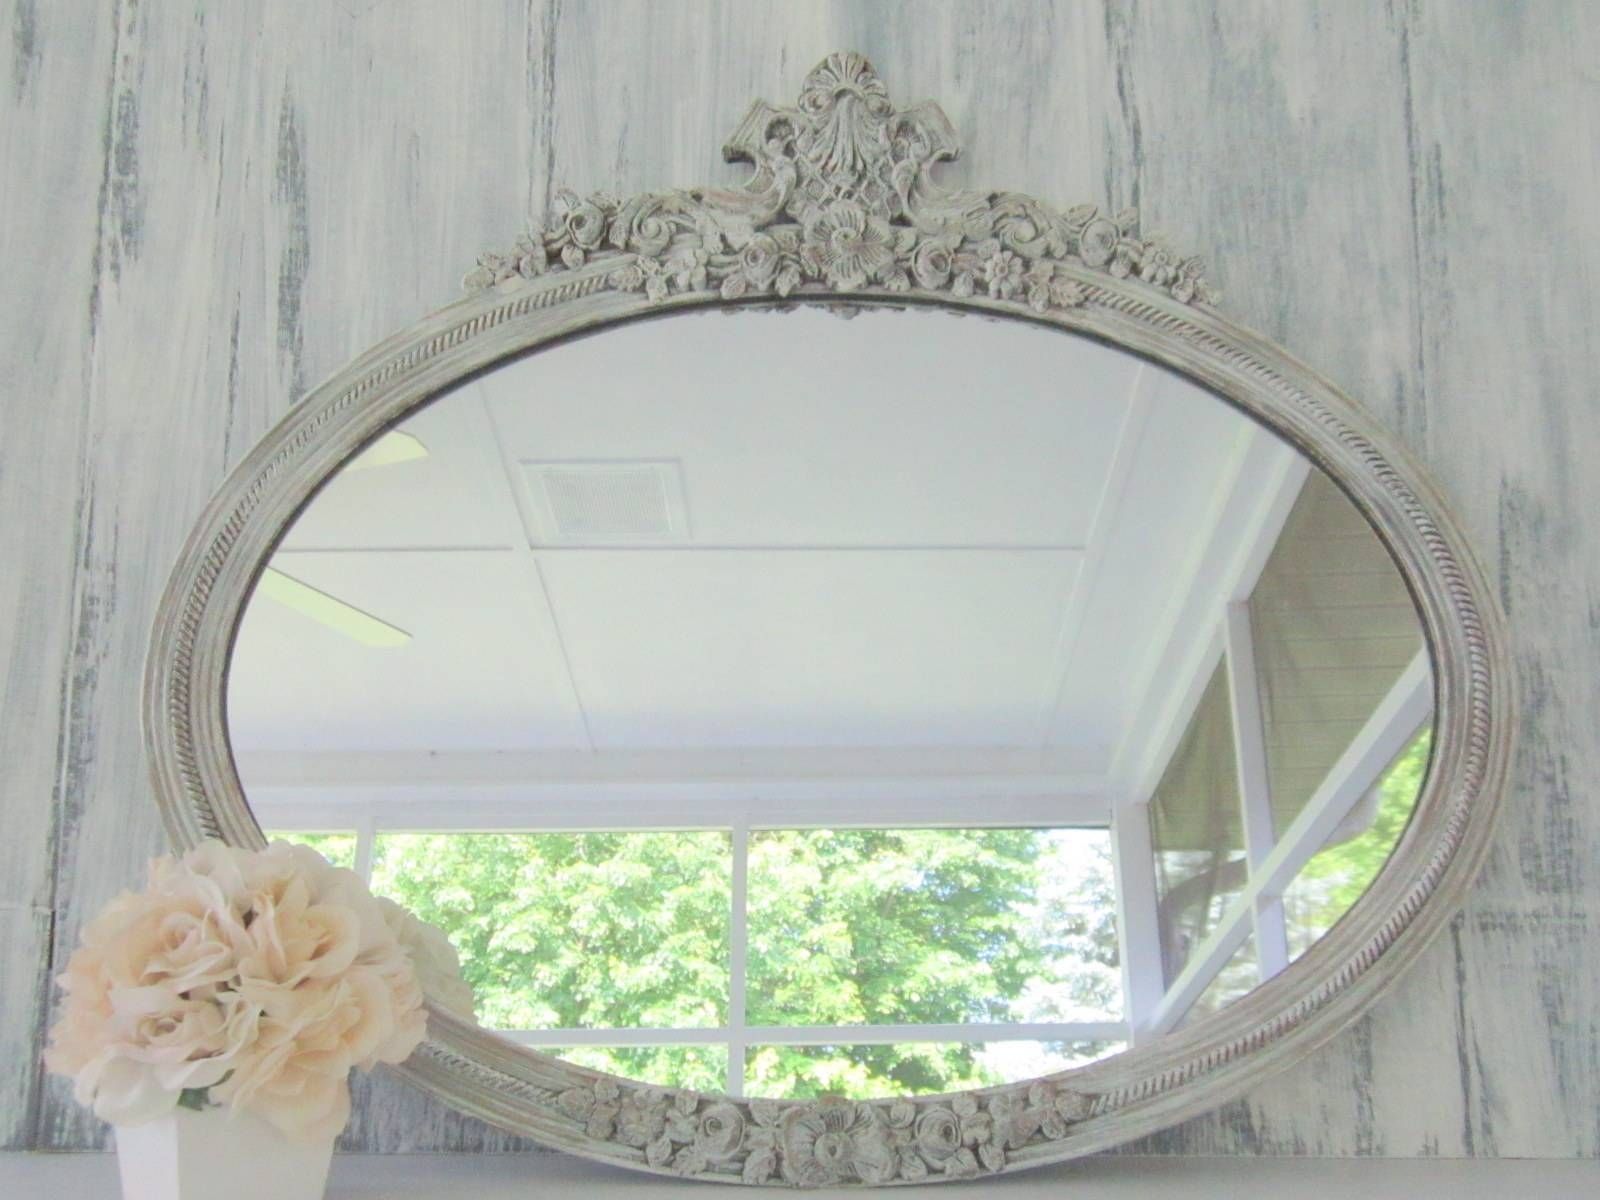 Revived Vintage Chalkboards: Antique Mirrors For Salemany With Regard To Antique Mirrors Vintage Mirrors (View 7 of 25)